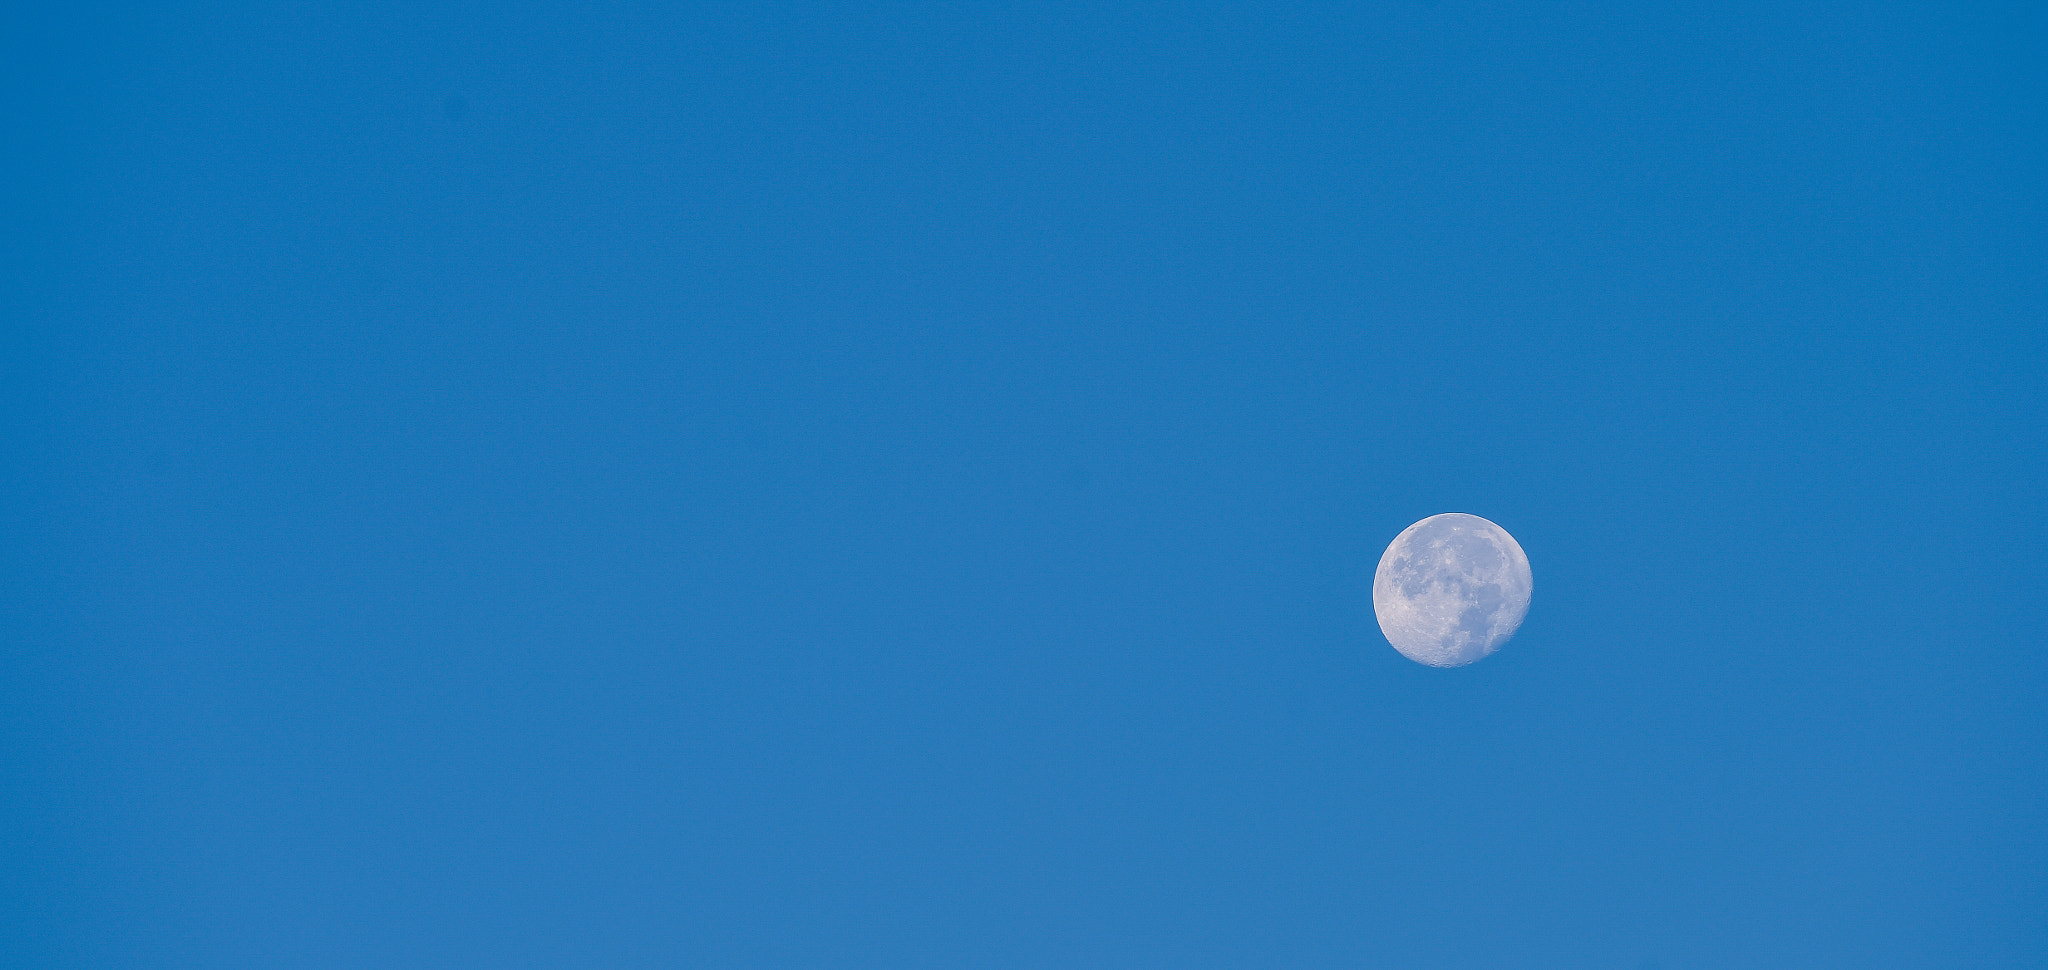 Nikon D4S + Nikon AF-S Nikkor 300mm F2.8G ED VR II sample photo. Full moon over blue sky at sunset photography